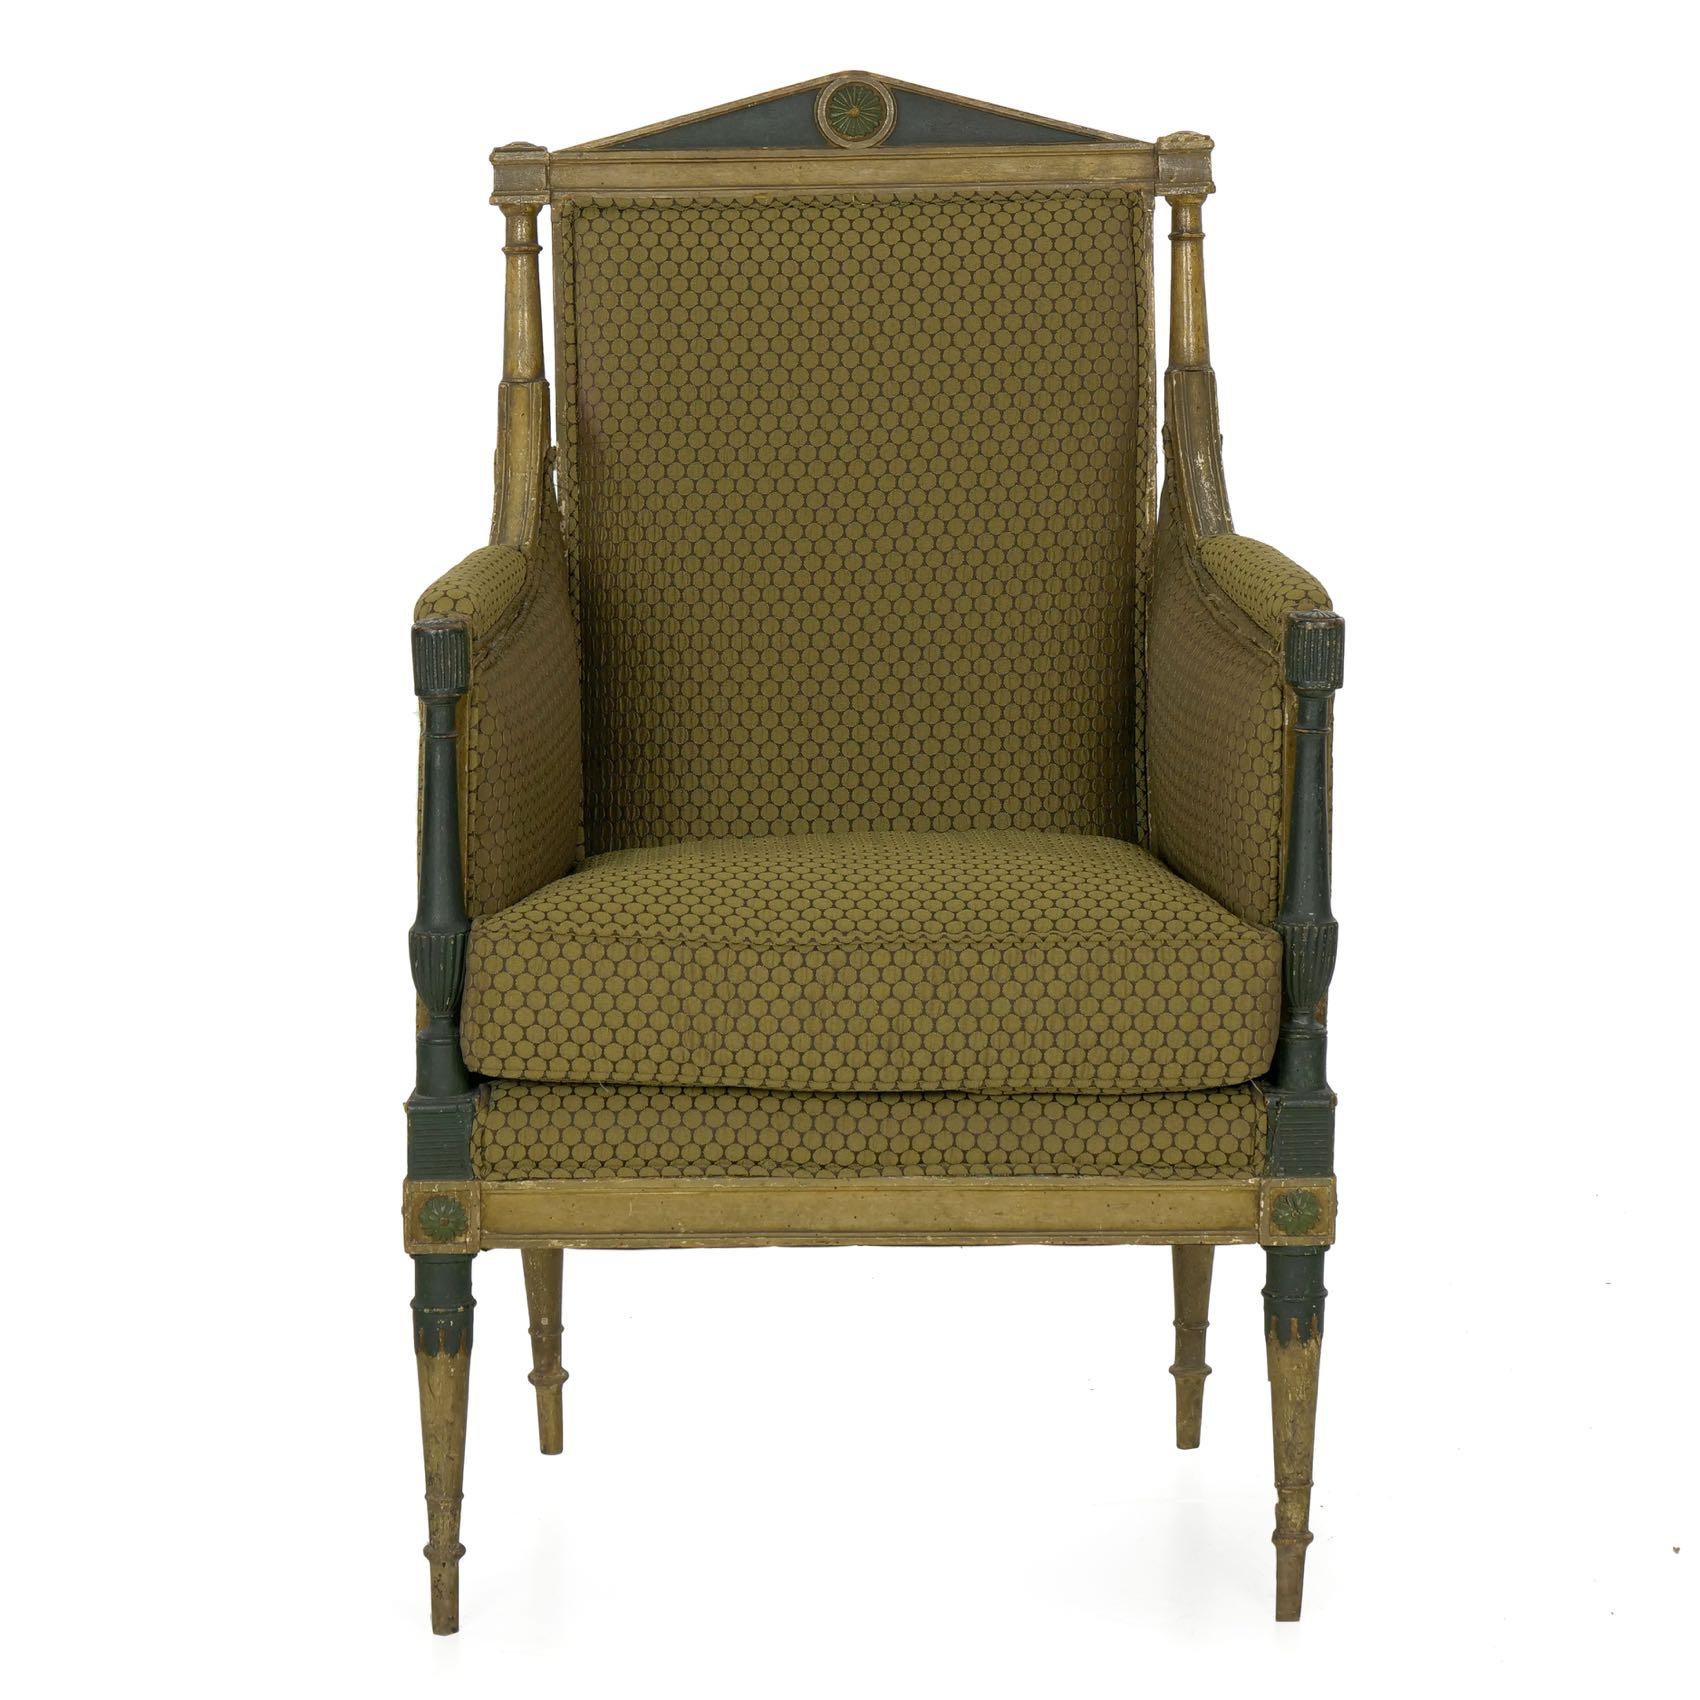 A fine lounging chair from the first half of the 19th century, the chair is notable for its gorgeous early worn polychromed surface. The charcoal and beige ground paints are highlighted with dark green painted embellishments, all being quite old and